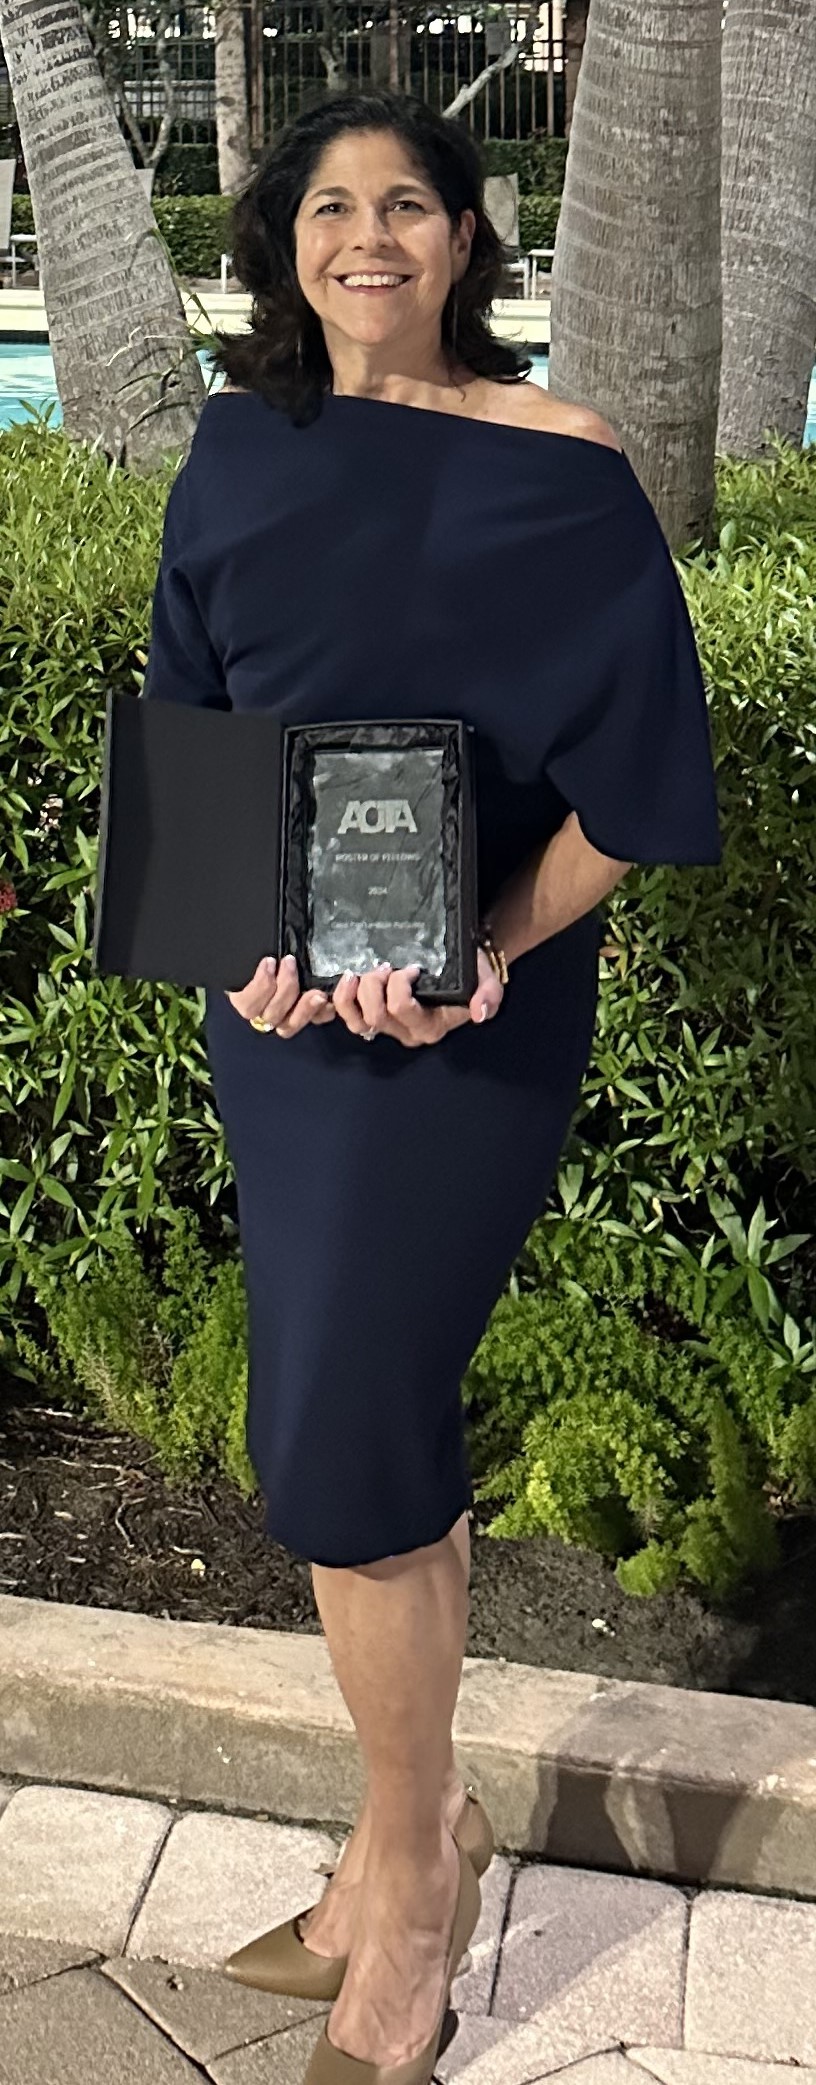 A UNE OT professor poses with a plaque after being inducted into the AOTA Roster of Fellows